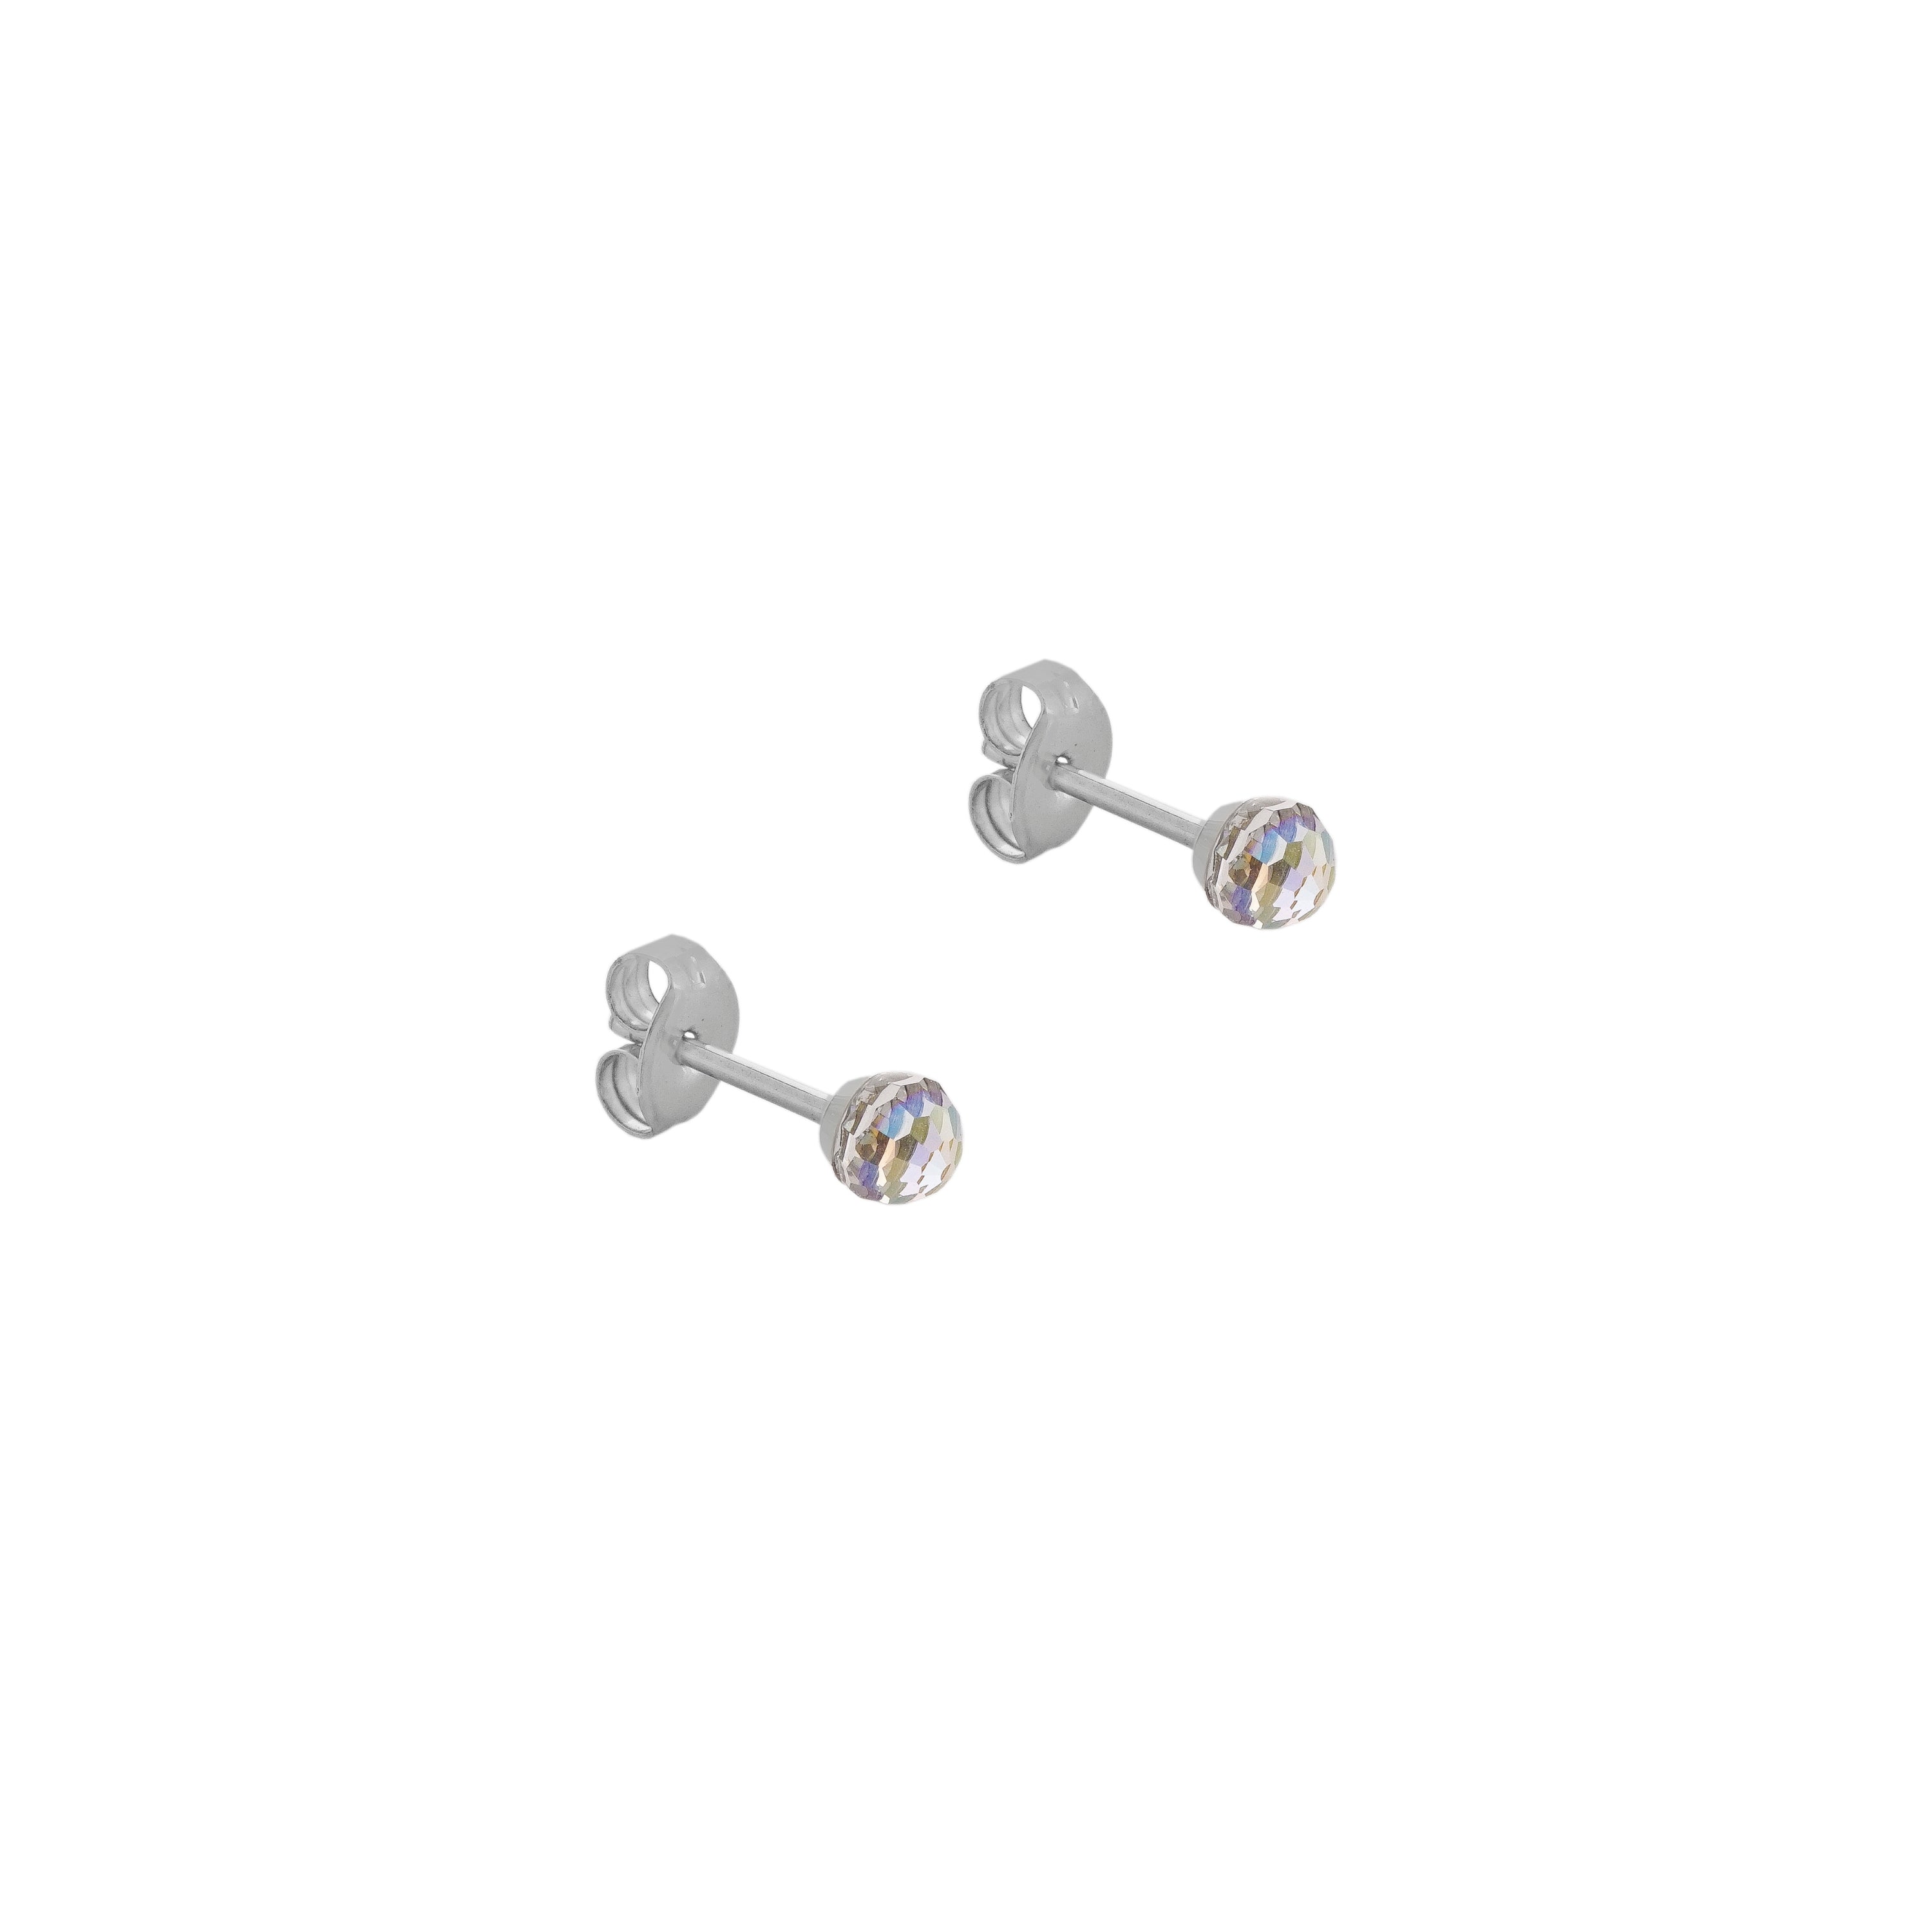 4MM Ab/Rainbow Crystal Ball Allergy free Stainless Steel Ear Studs For Kids